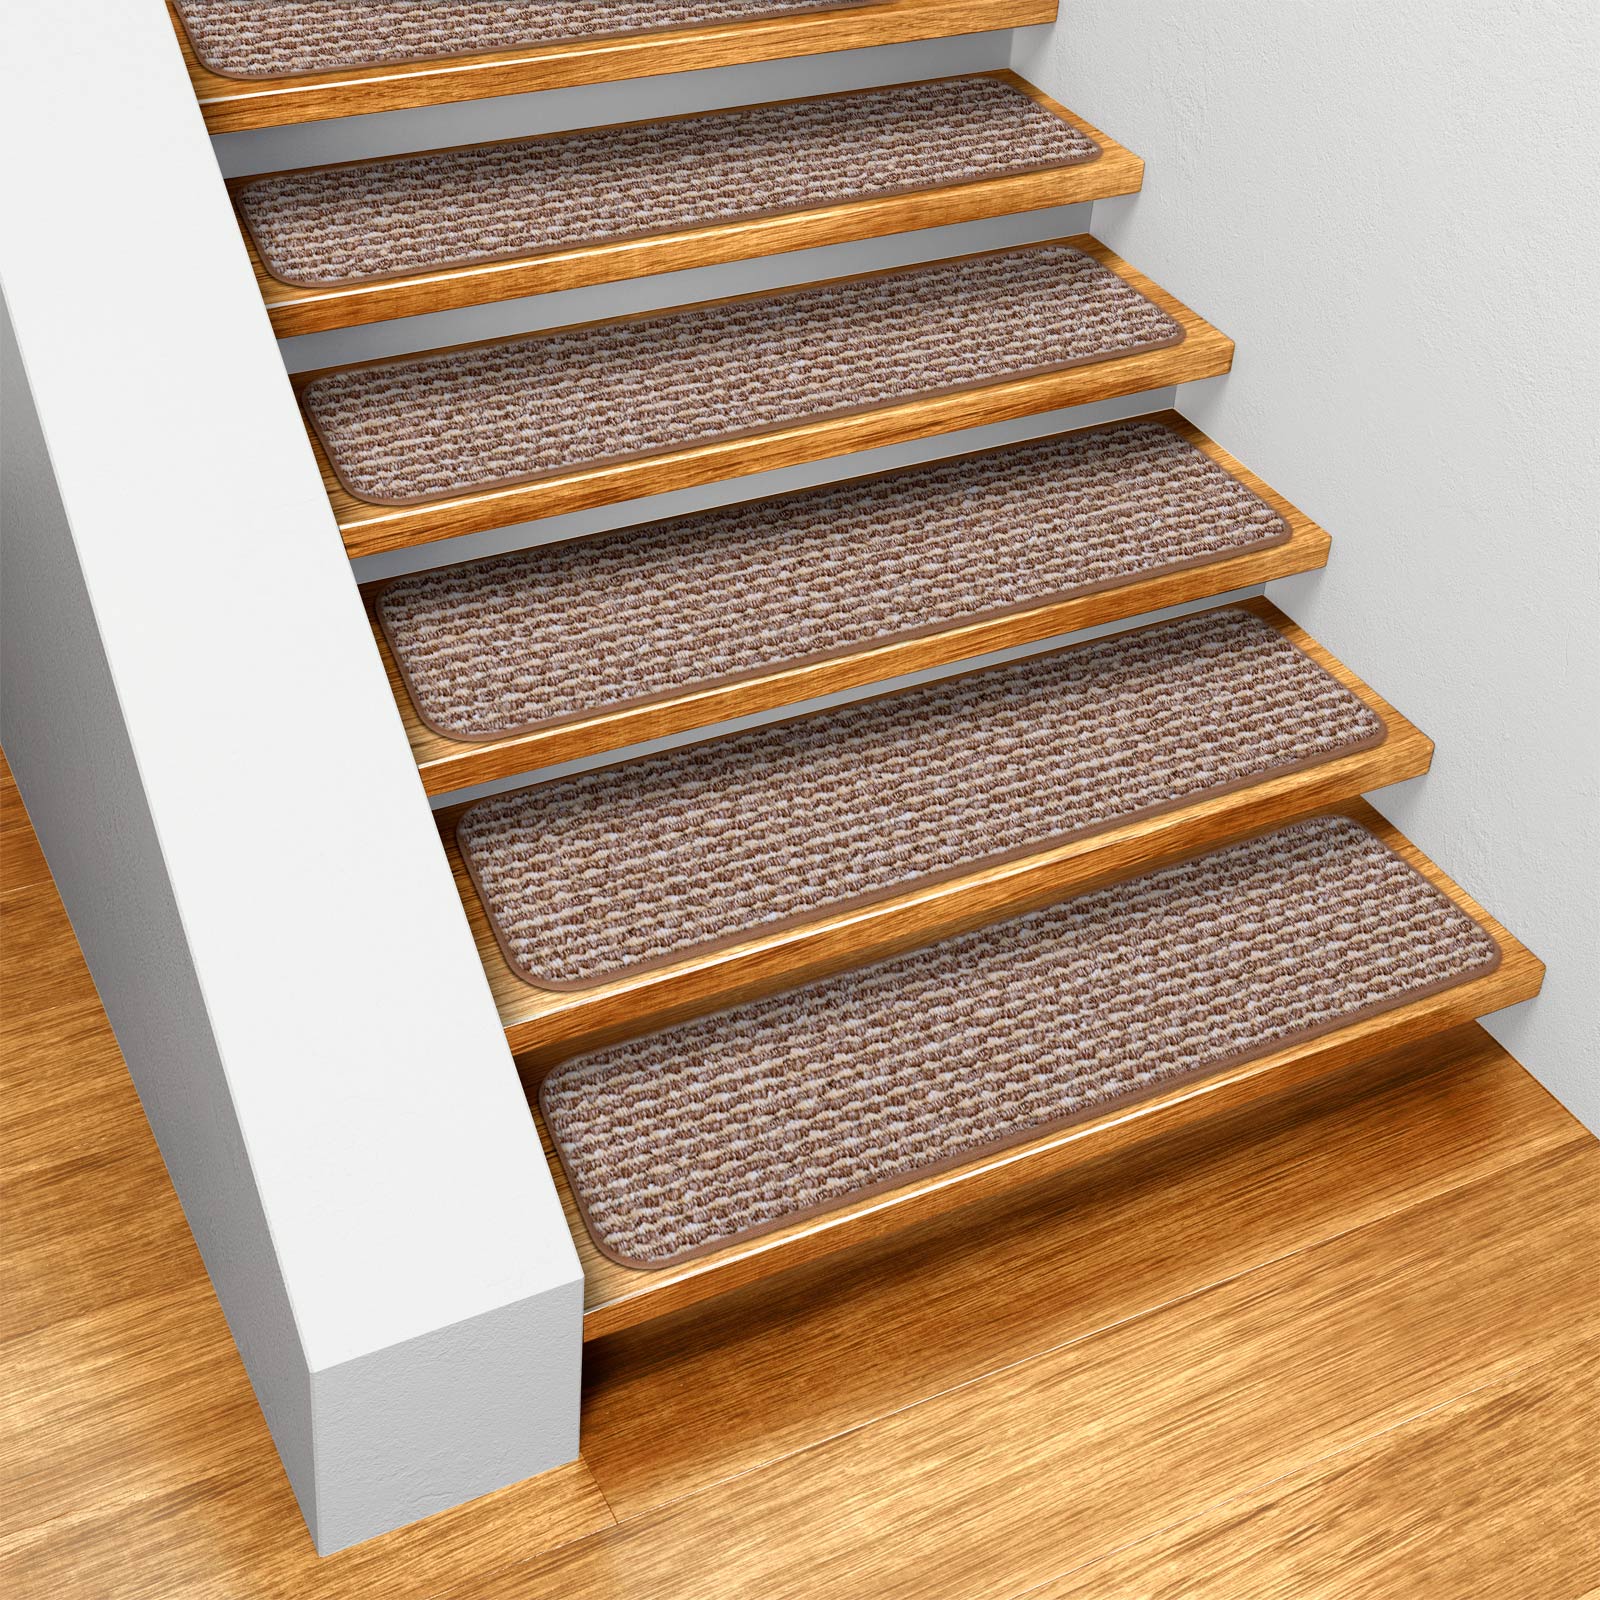 House, Home and More Set of 15 Skid-resistant Carpet Stair Treads - Praline Brown - 8 In. X 30 In.